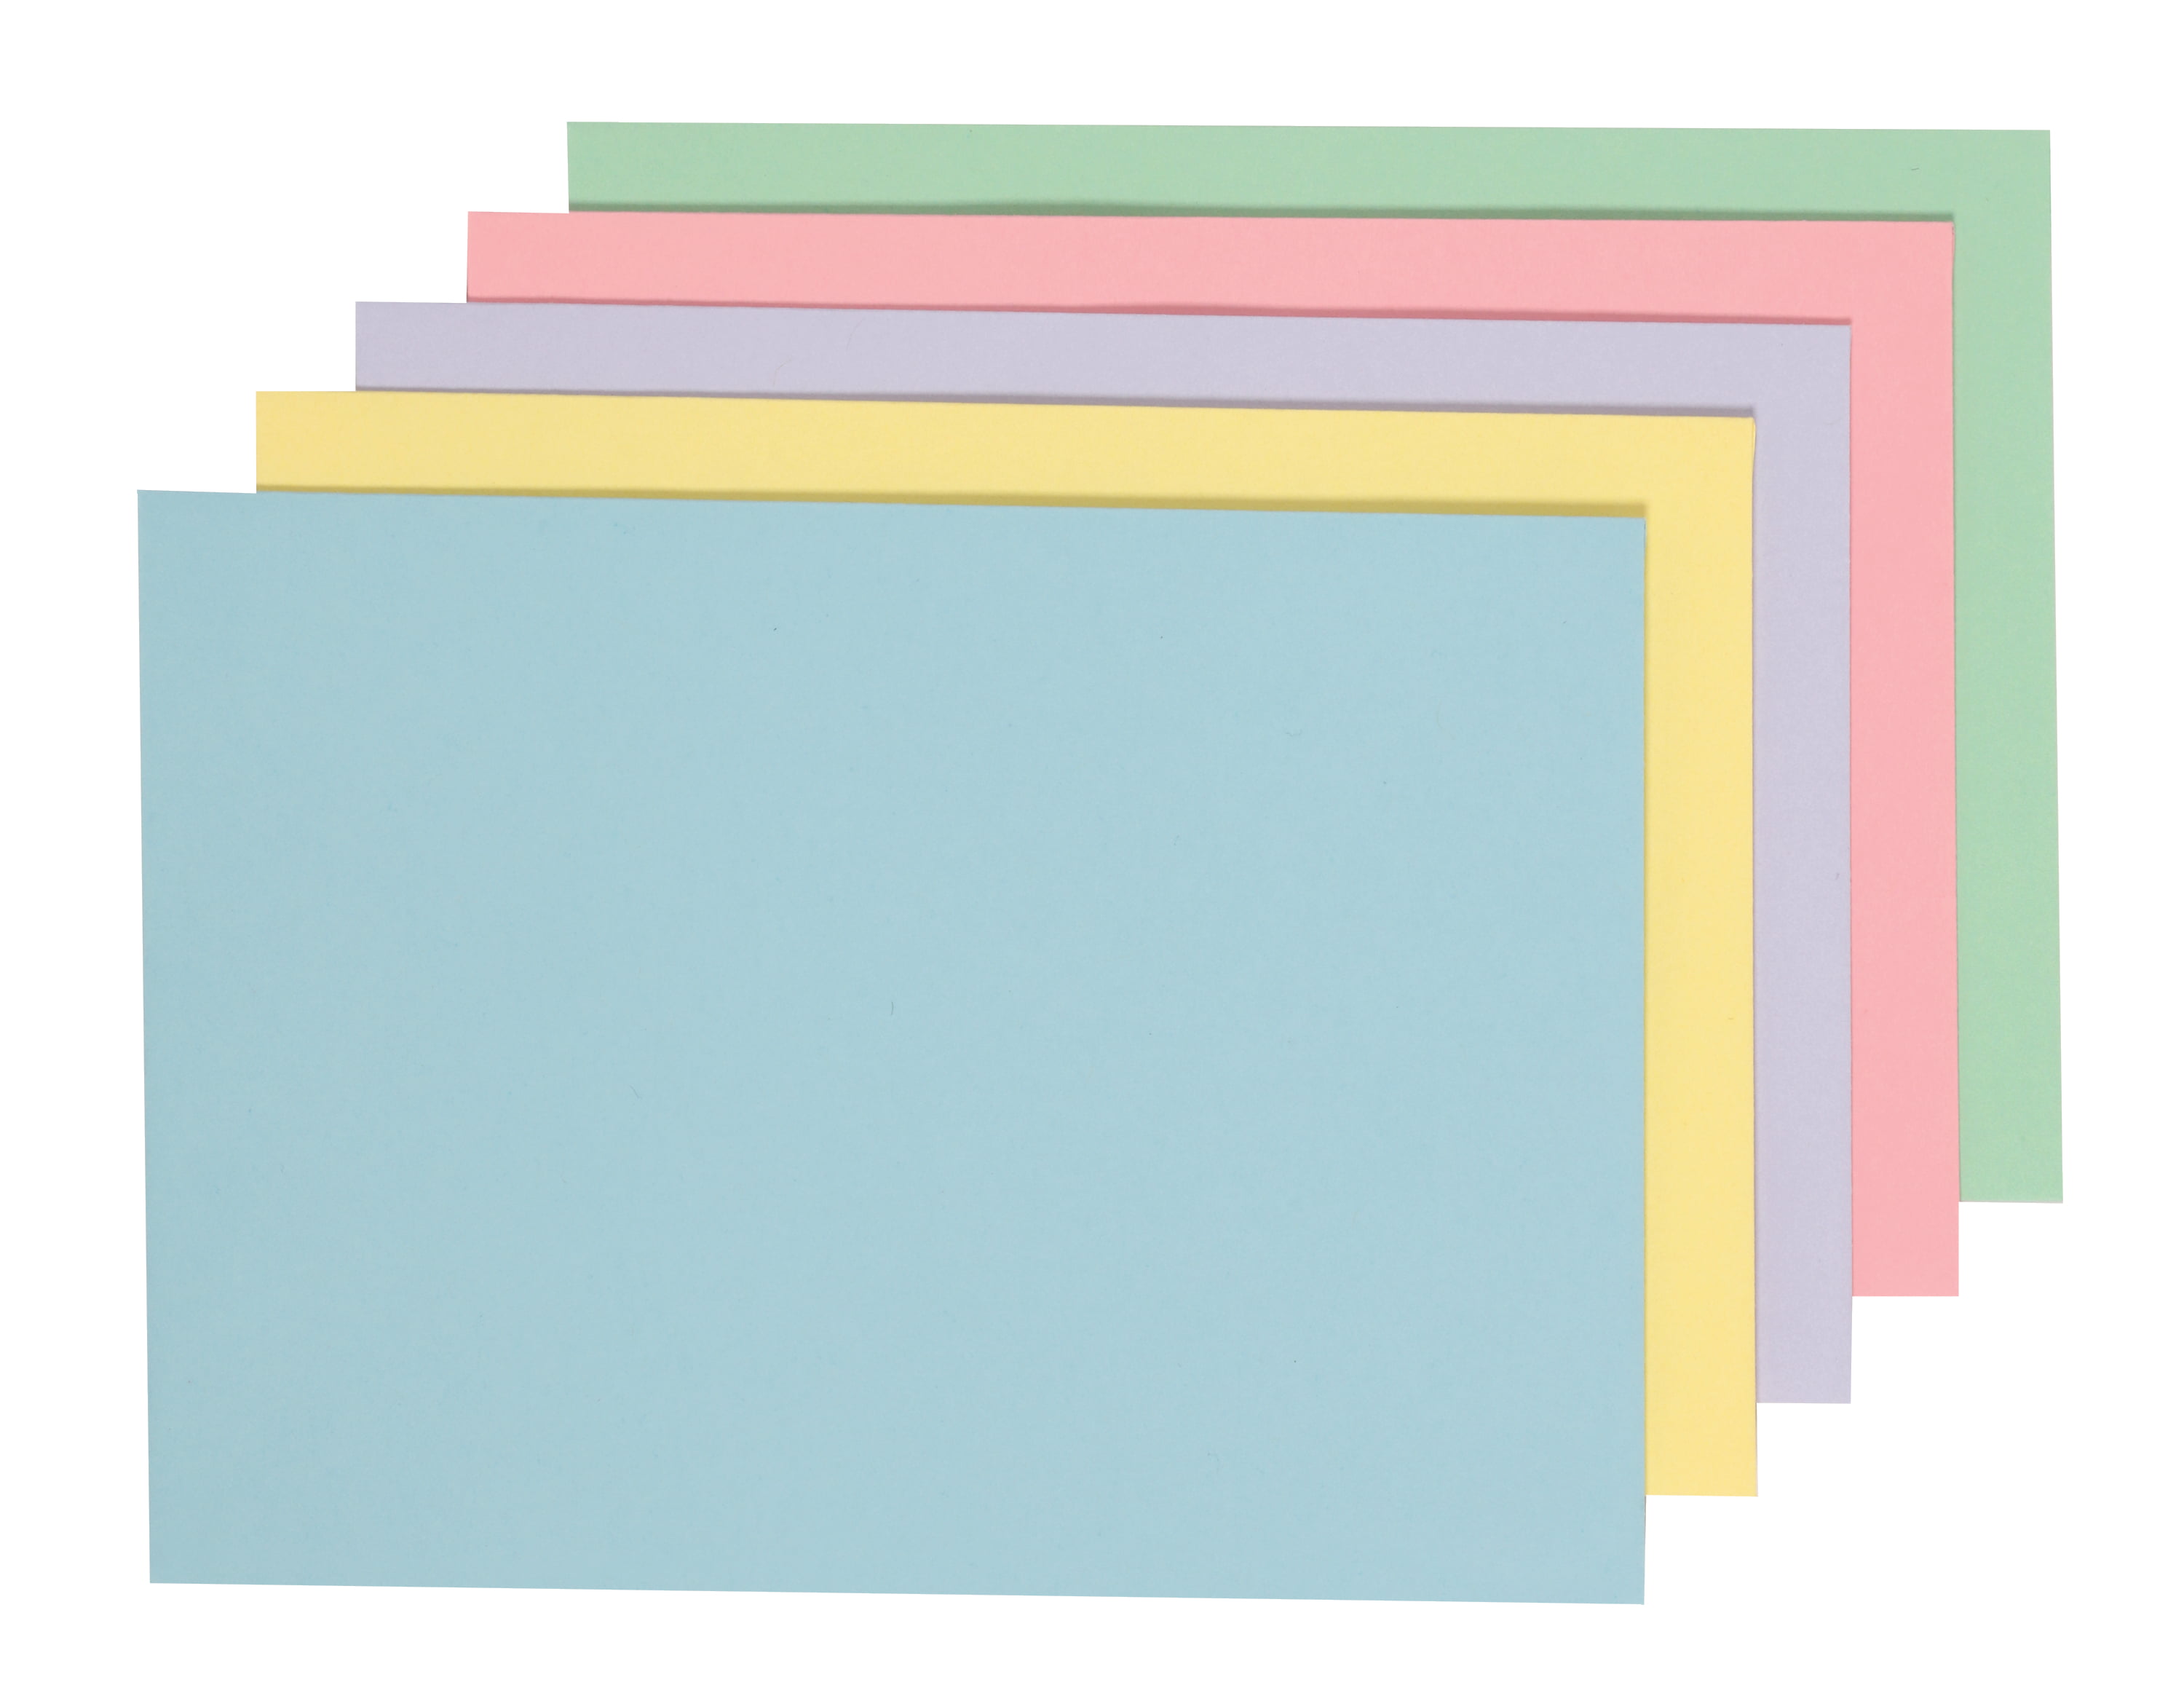 Peel & Seal 6 x 9 Inches 80lb Paper Blake Creative Color - Pack of 25 Pastel Pink Invitation Envelopes Baby Pink 45301-76 